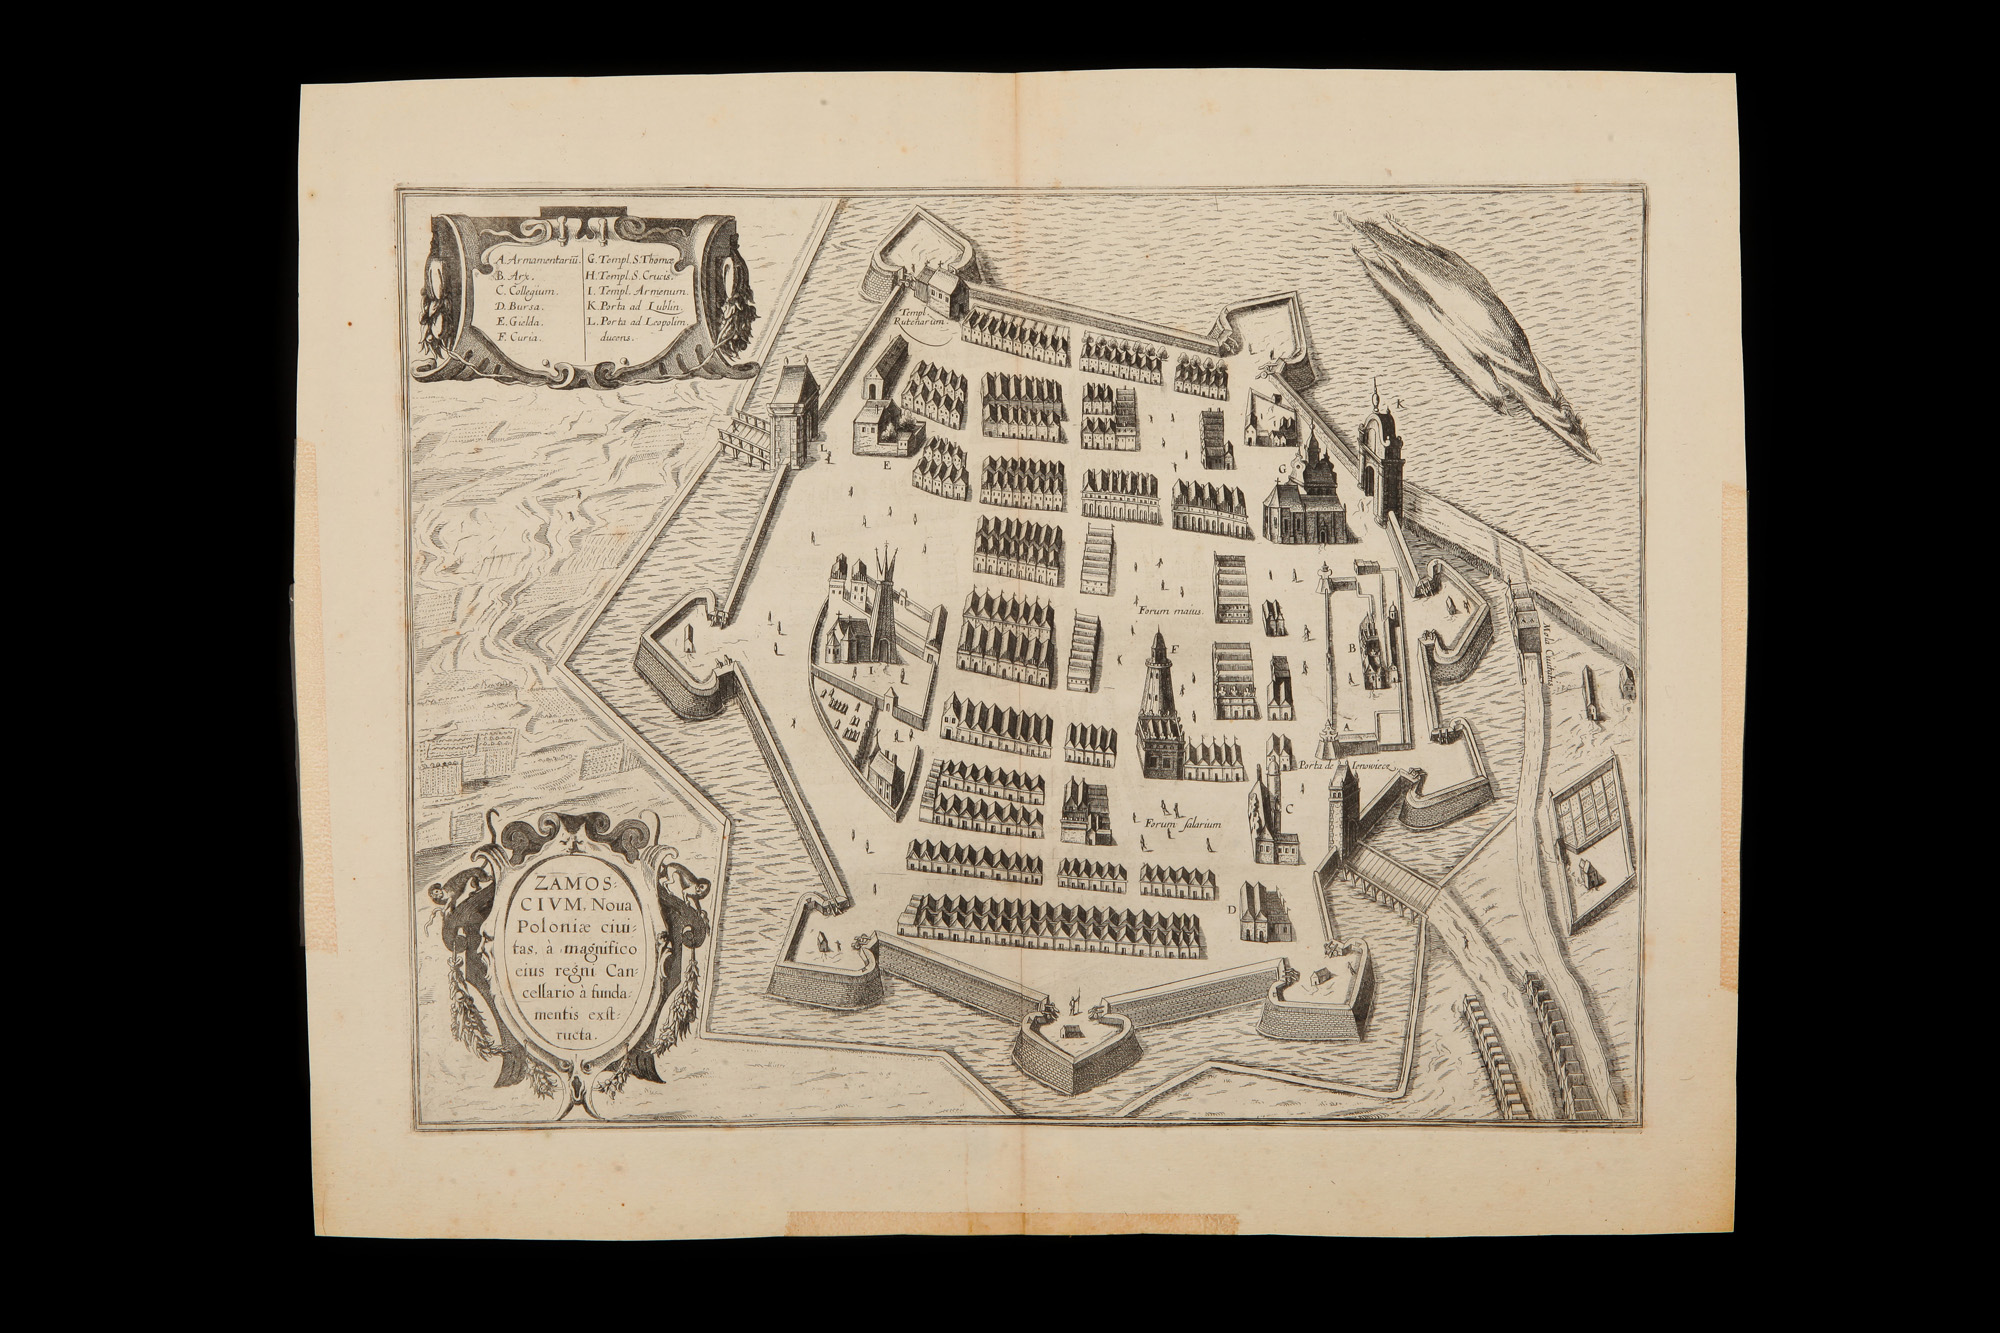 A 17th Century Map of Zamosc in Poland,